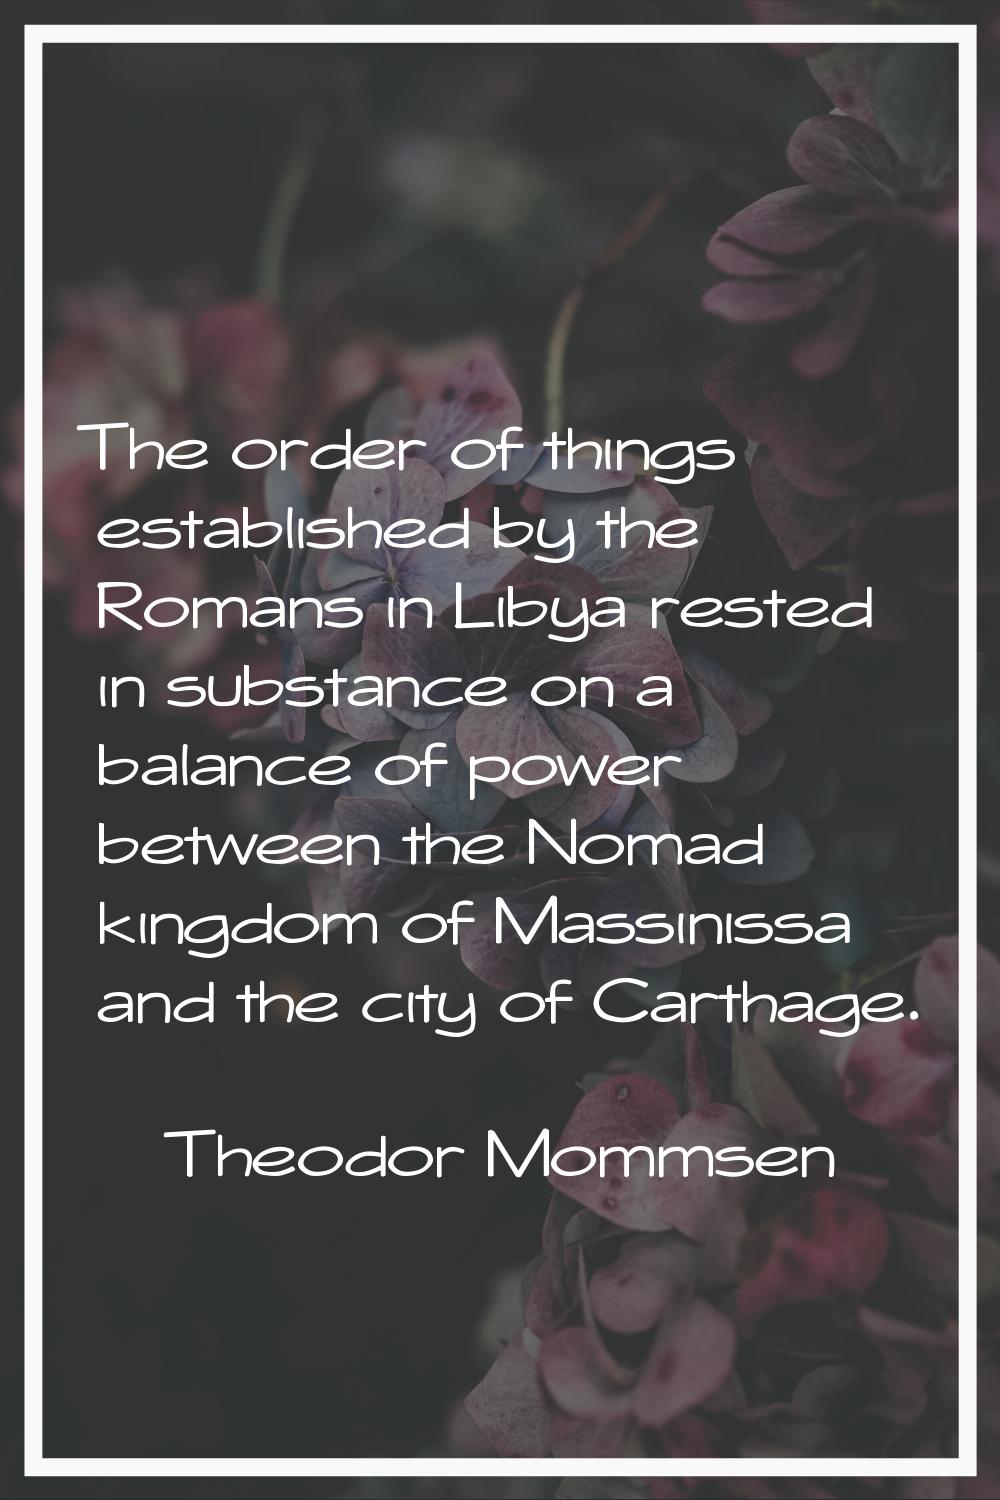 The order of things established by the Romans in Libya rested in substance on a balance of power be